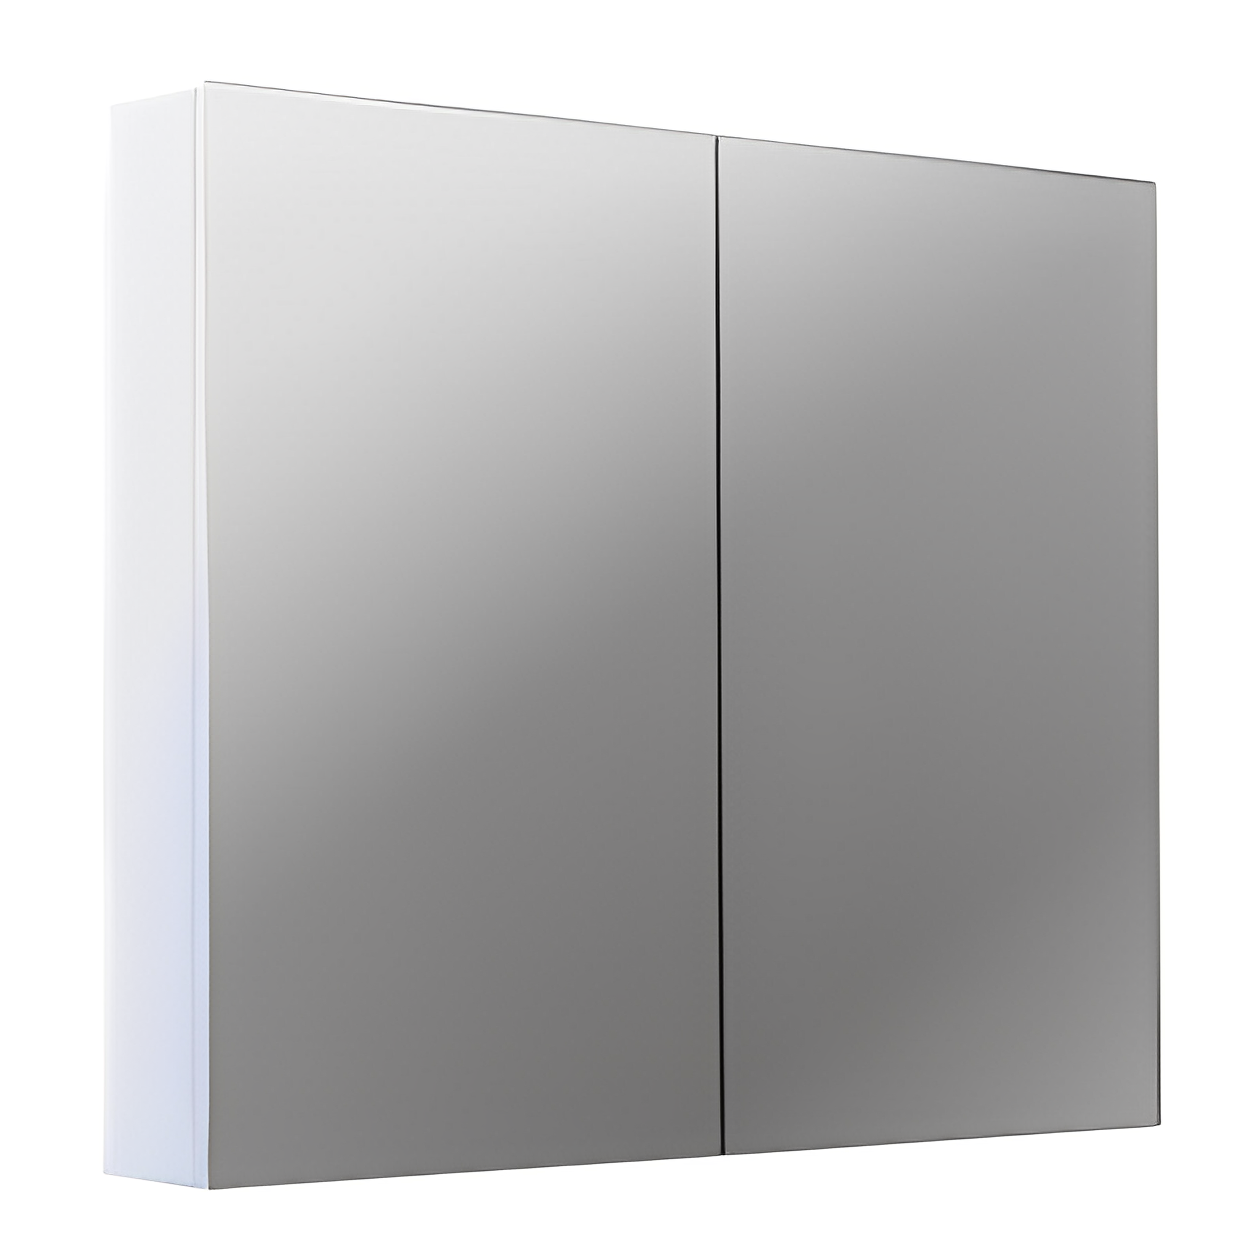 POSEIDON MPSV MIRROR CABINET (AVAILABLE IN 600MM AND 750MM)